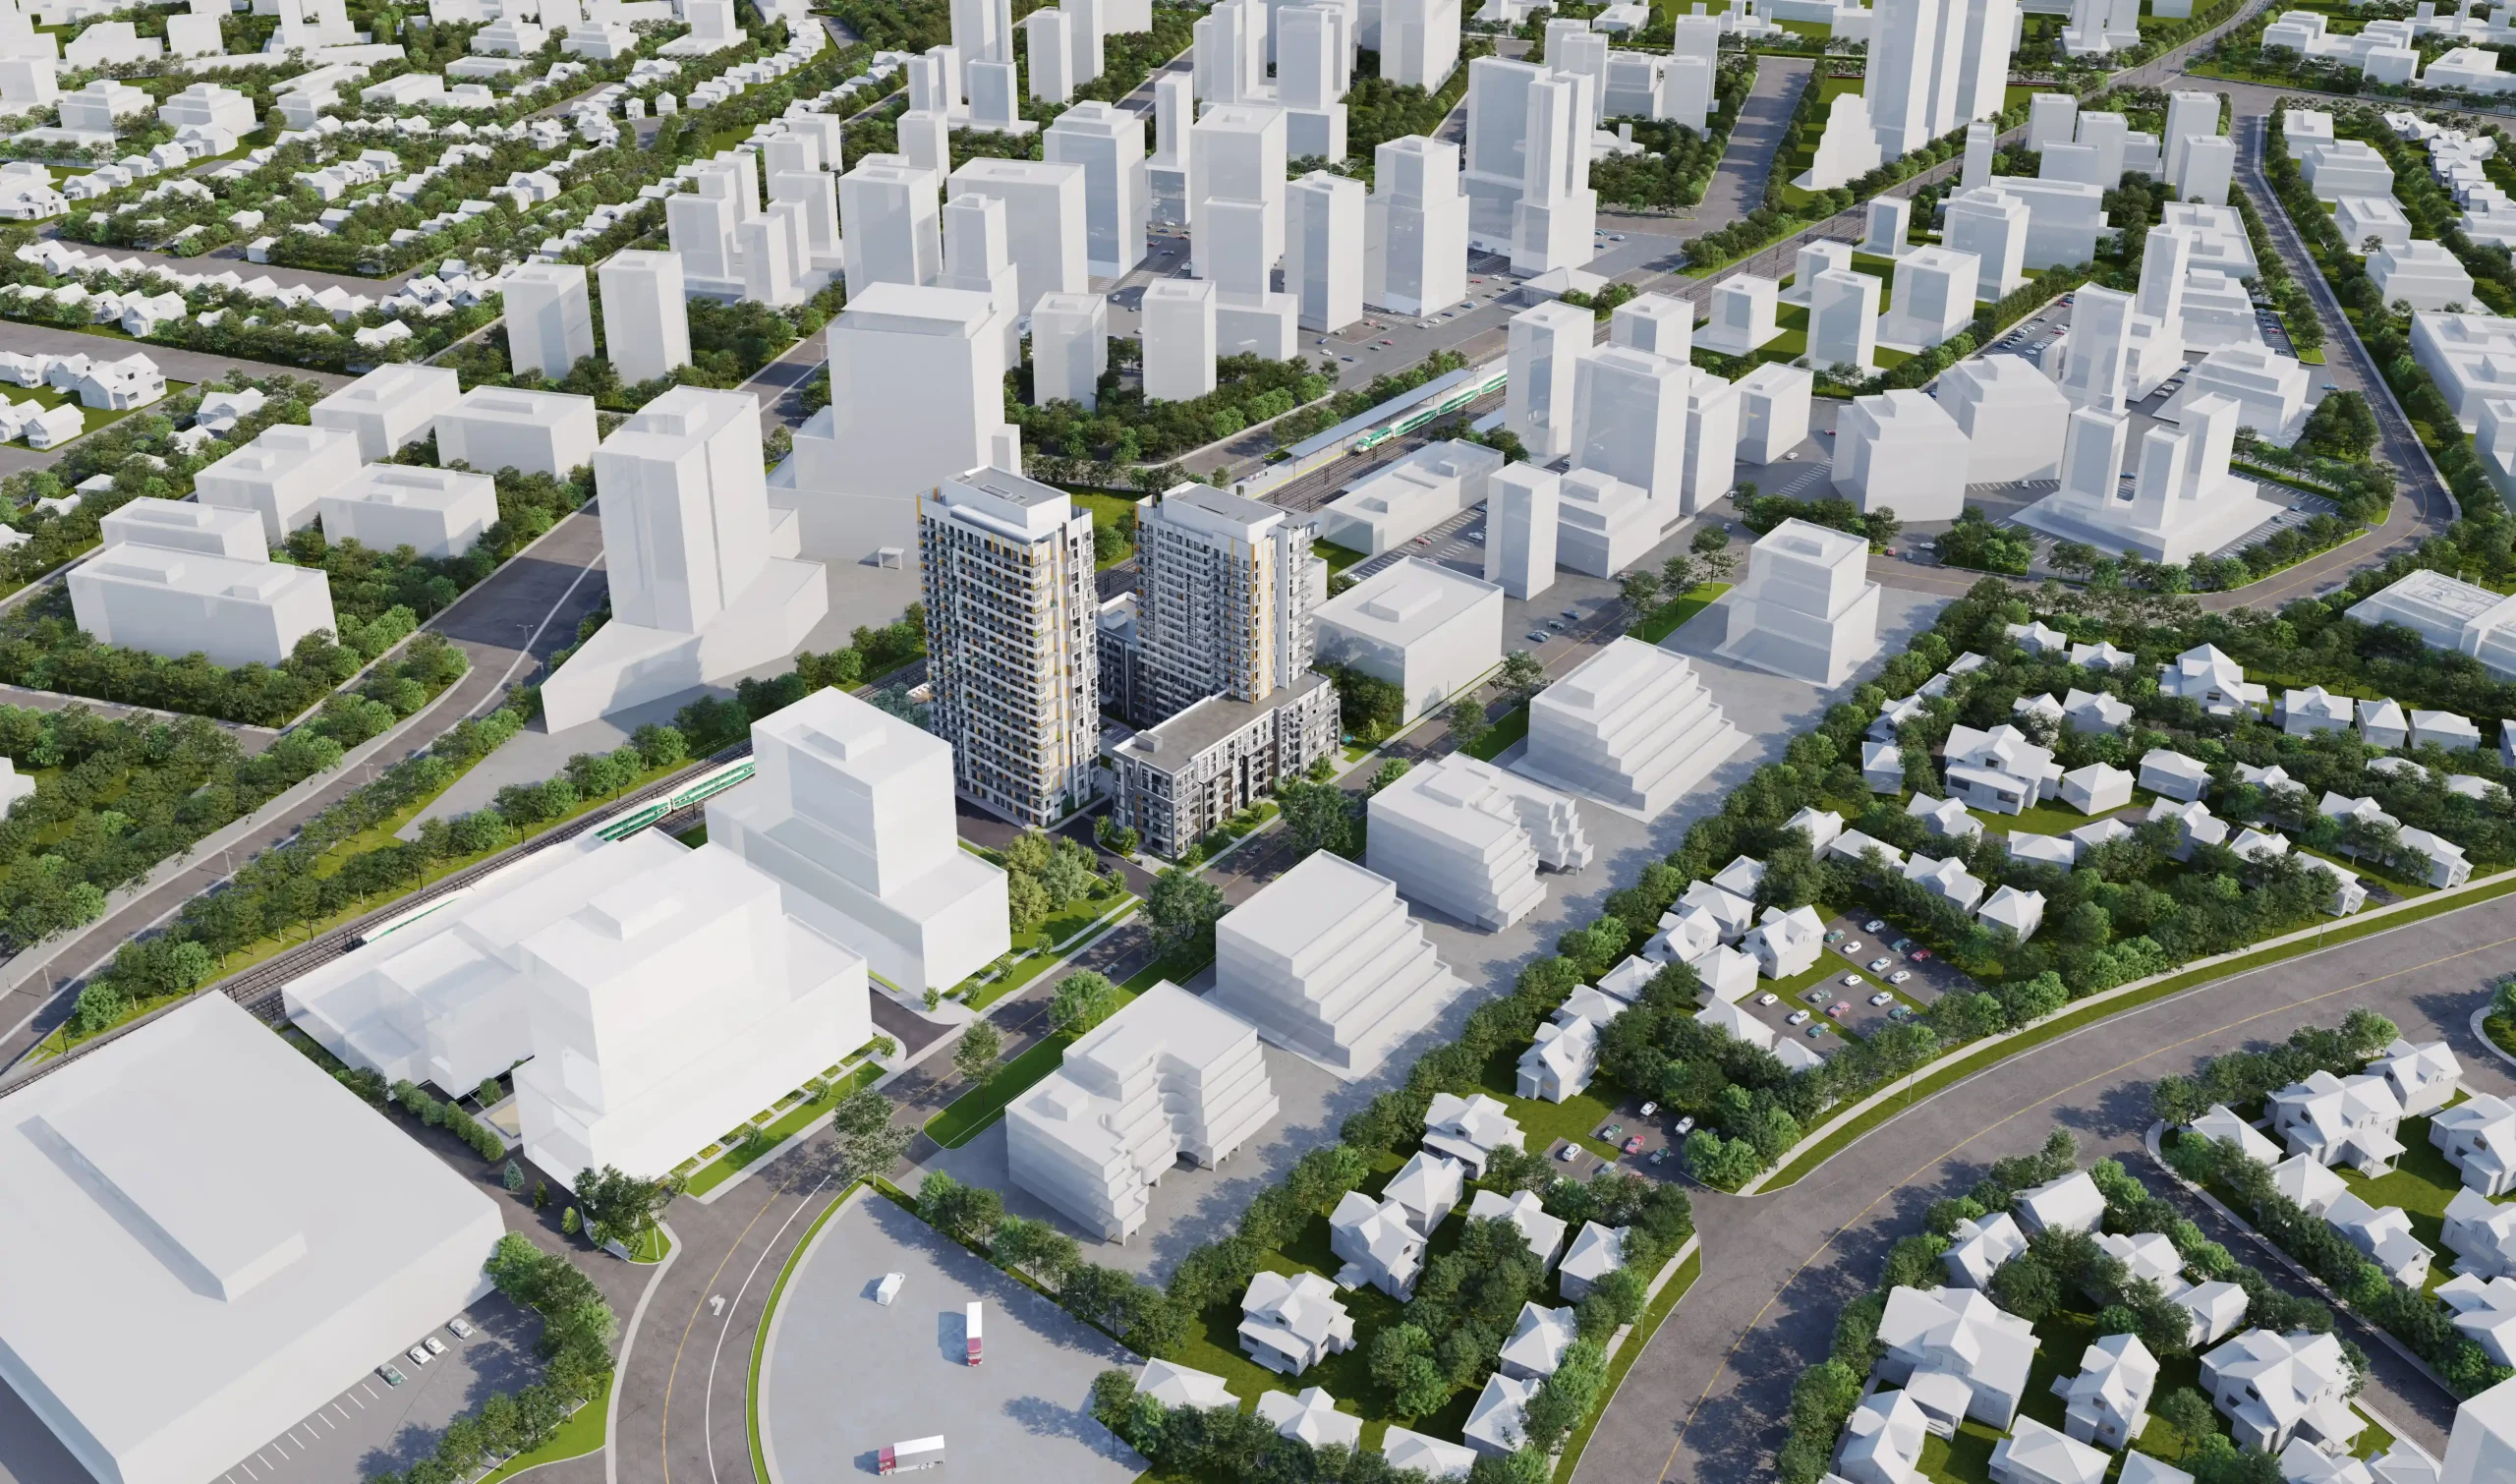 Stationside-Condos-Milton-Mobility-Hub-Rendering-scaled-1-1